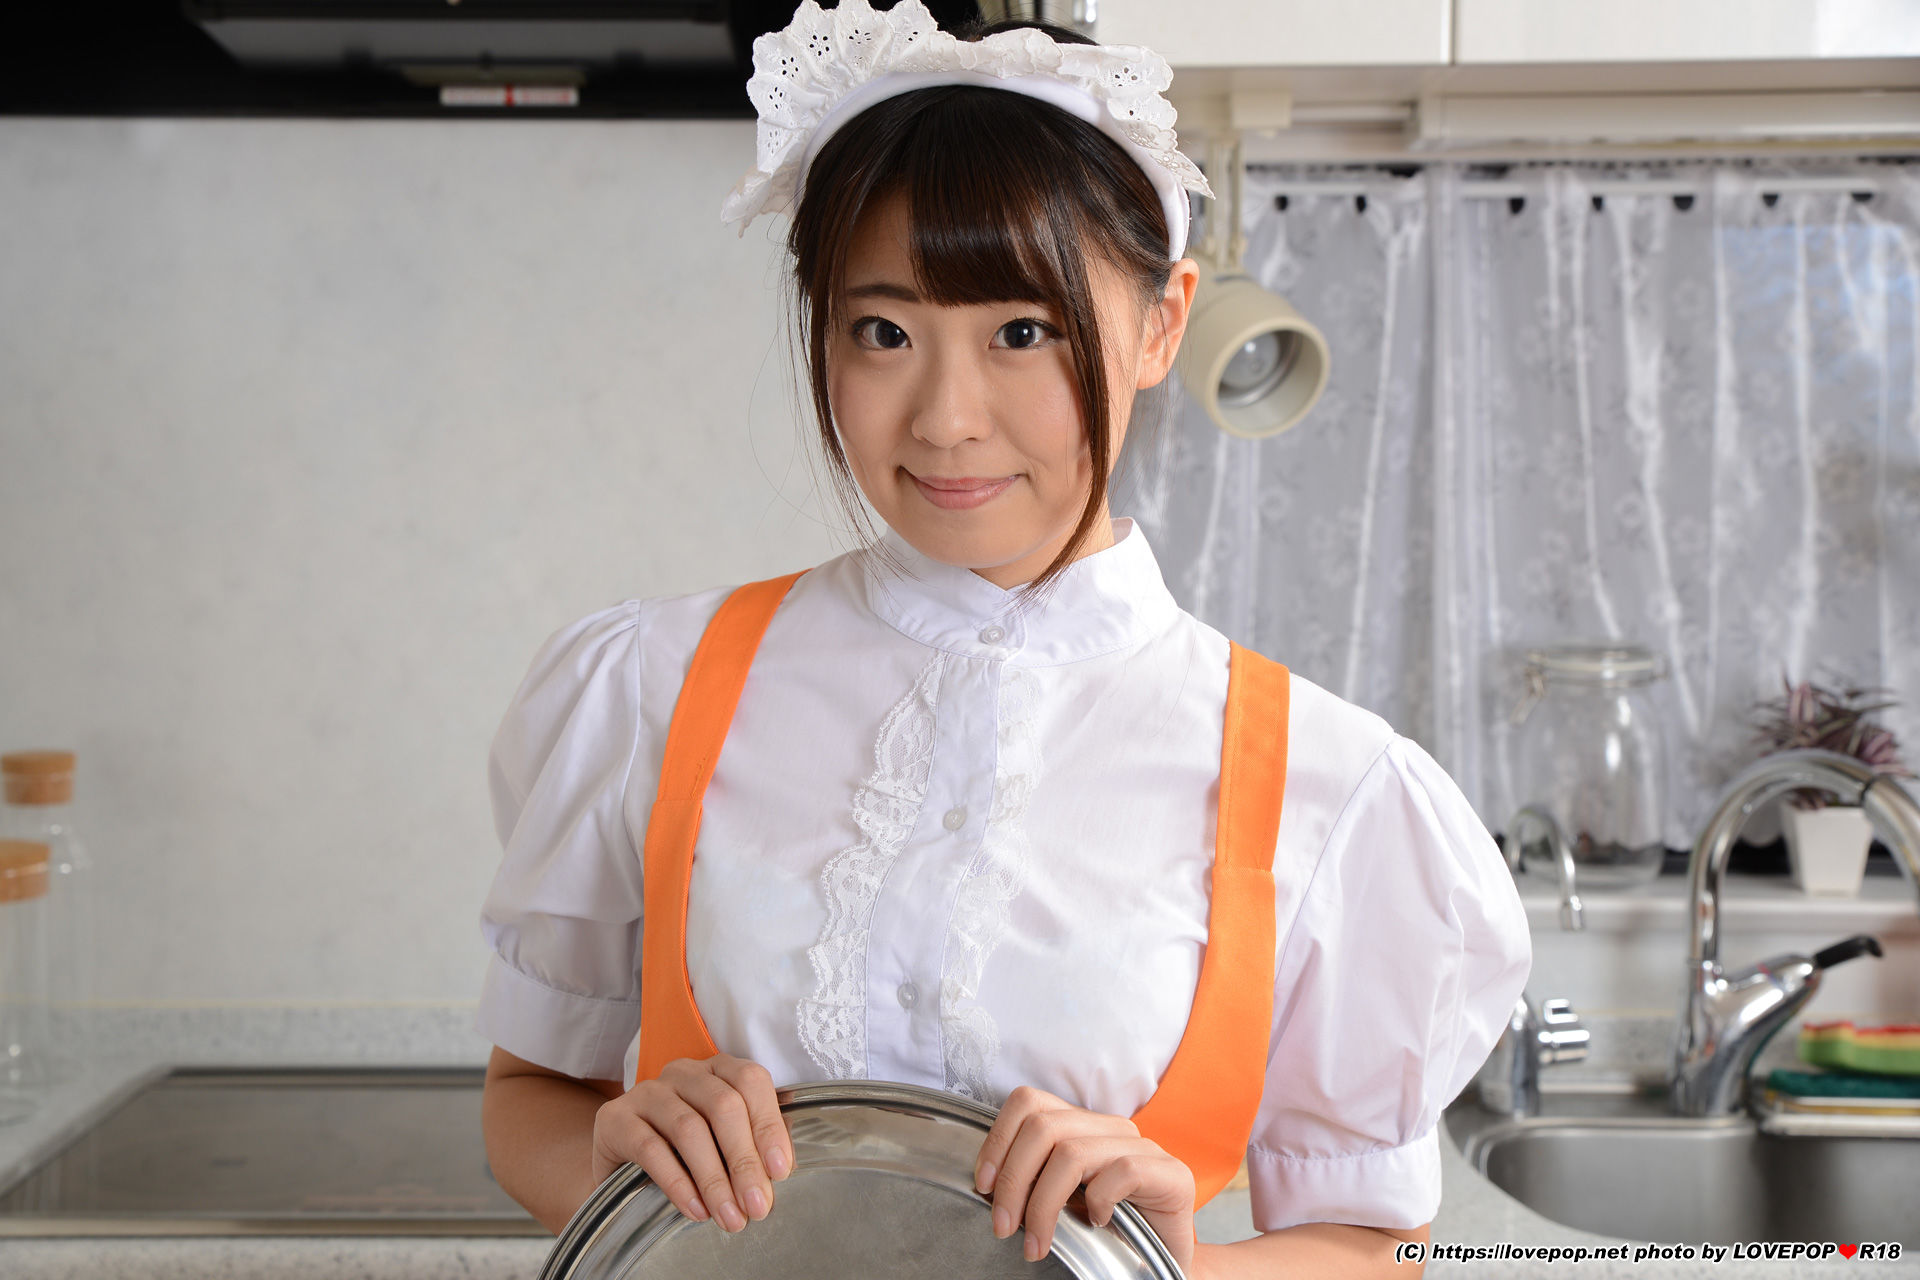 [LOVEPOP] Special Maid Collection - Airi Satou さとう愛理 Photoset 05  第3张